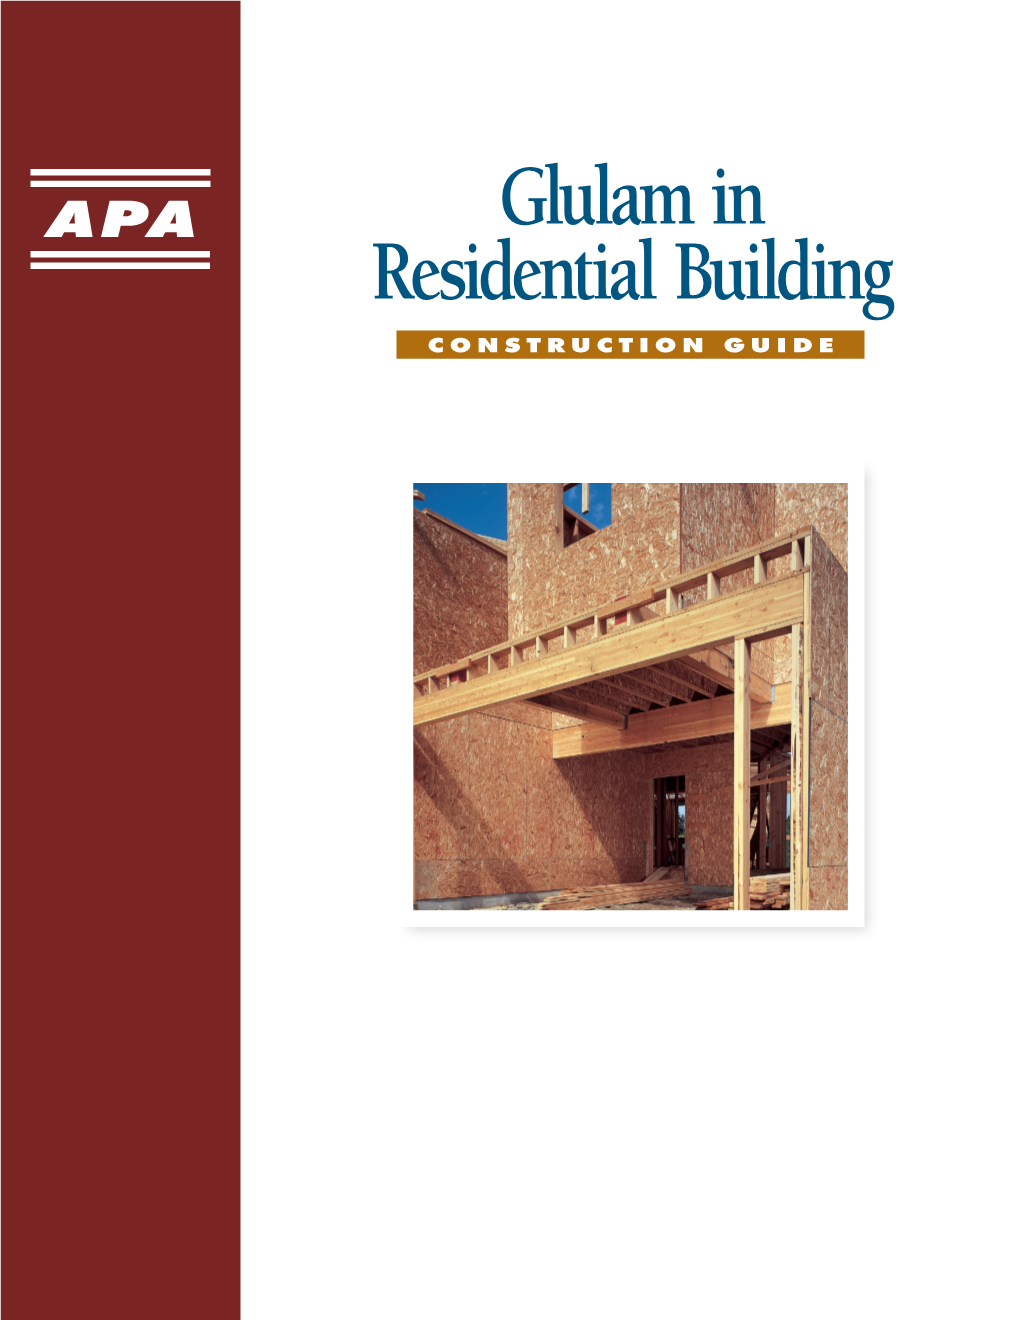 Glulam in Residential Building CONSTRUCTION GUIDE Glulam in Residential Building Construction Guide